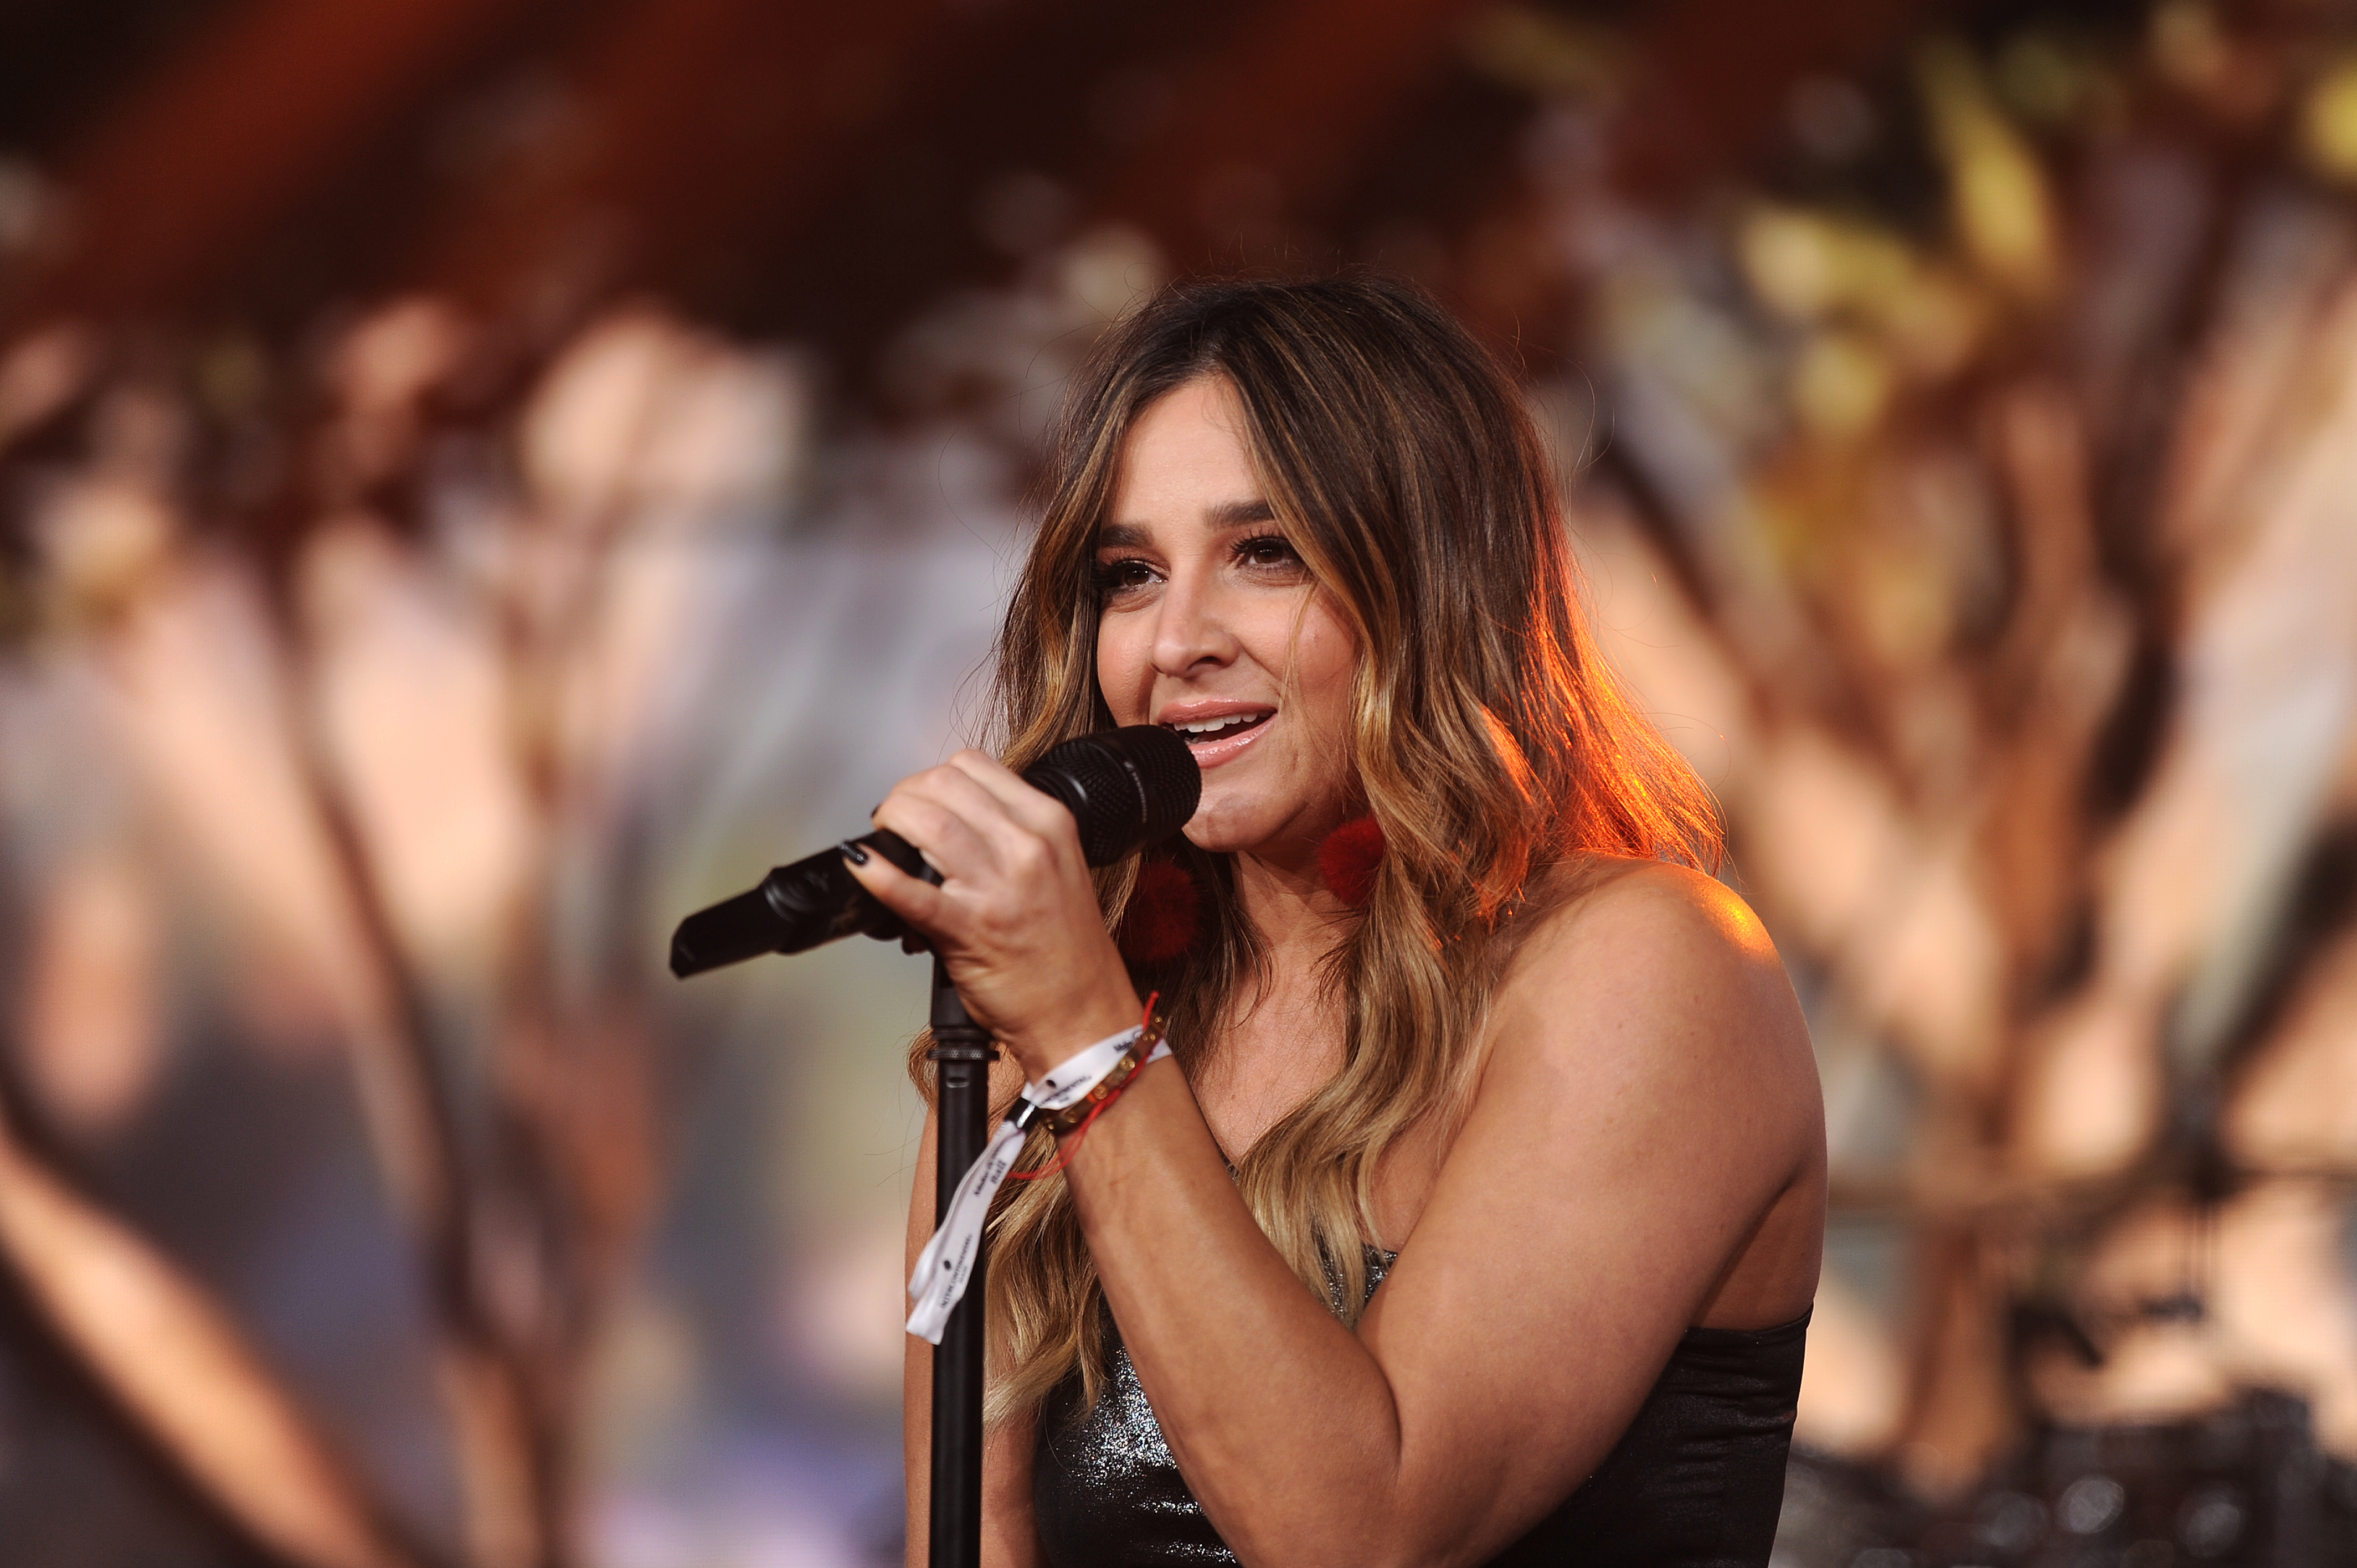 Alisan Porter performs on stage at the 24th Annual InterContinental Miami Make-A-Wish® Ball in Miami, Florida, on November 3, 2018. | Source: Getty Images